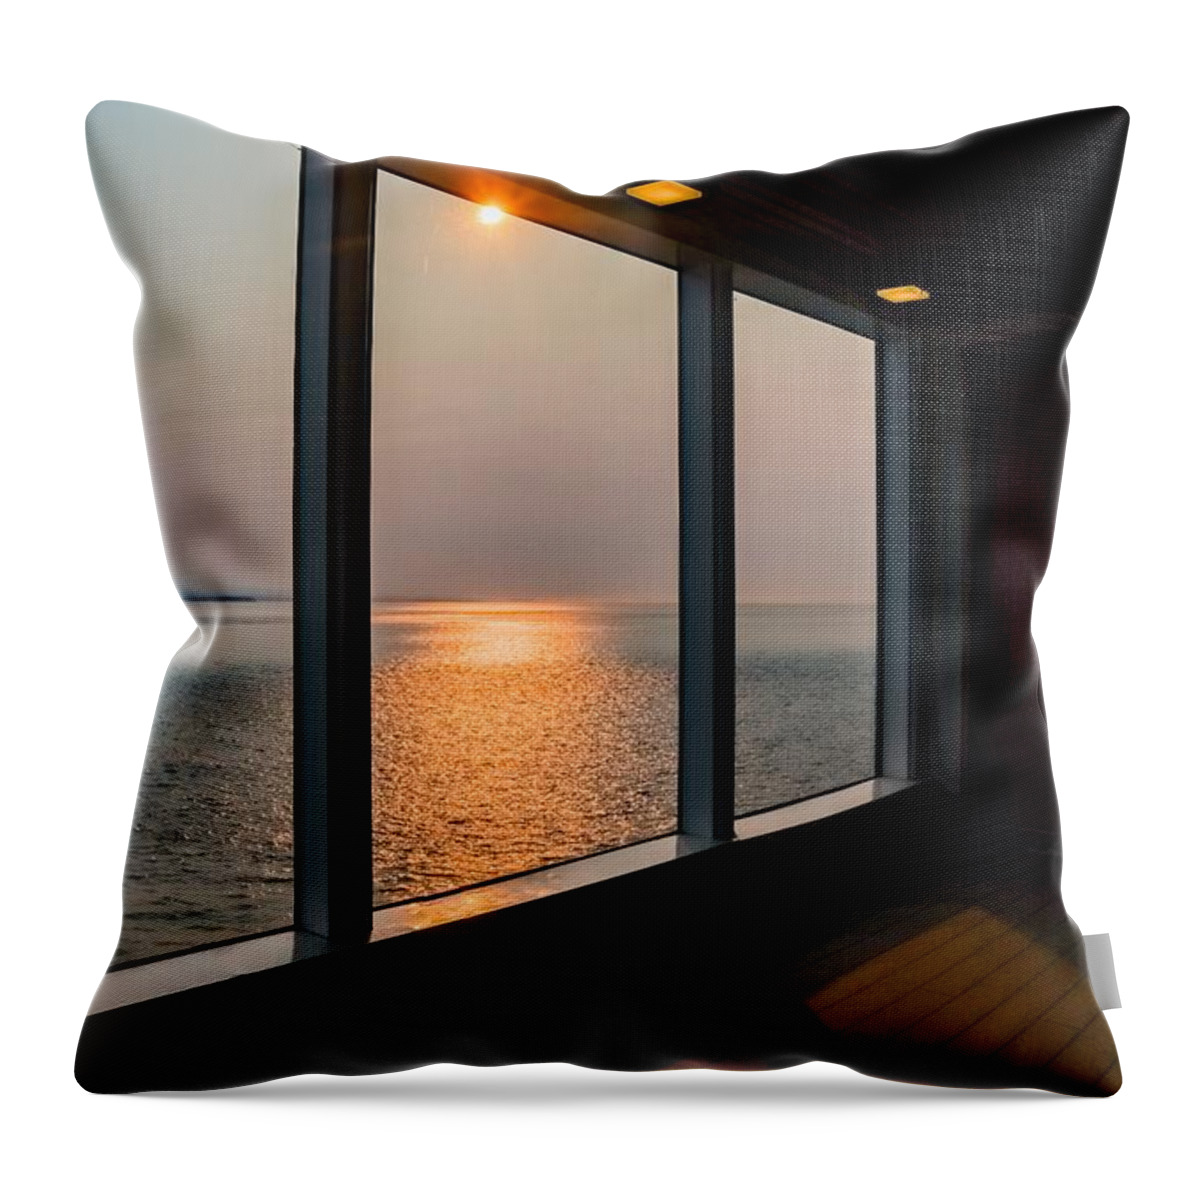 Ship Throw Pillow featuring the photograph A Cruise Ship Window Sunset by Ed Williams